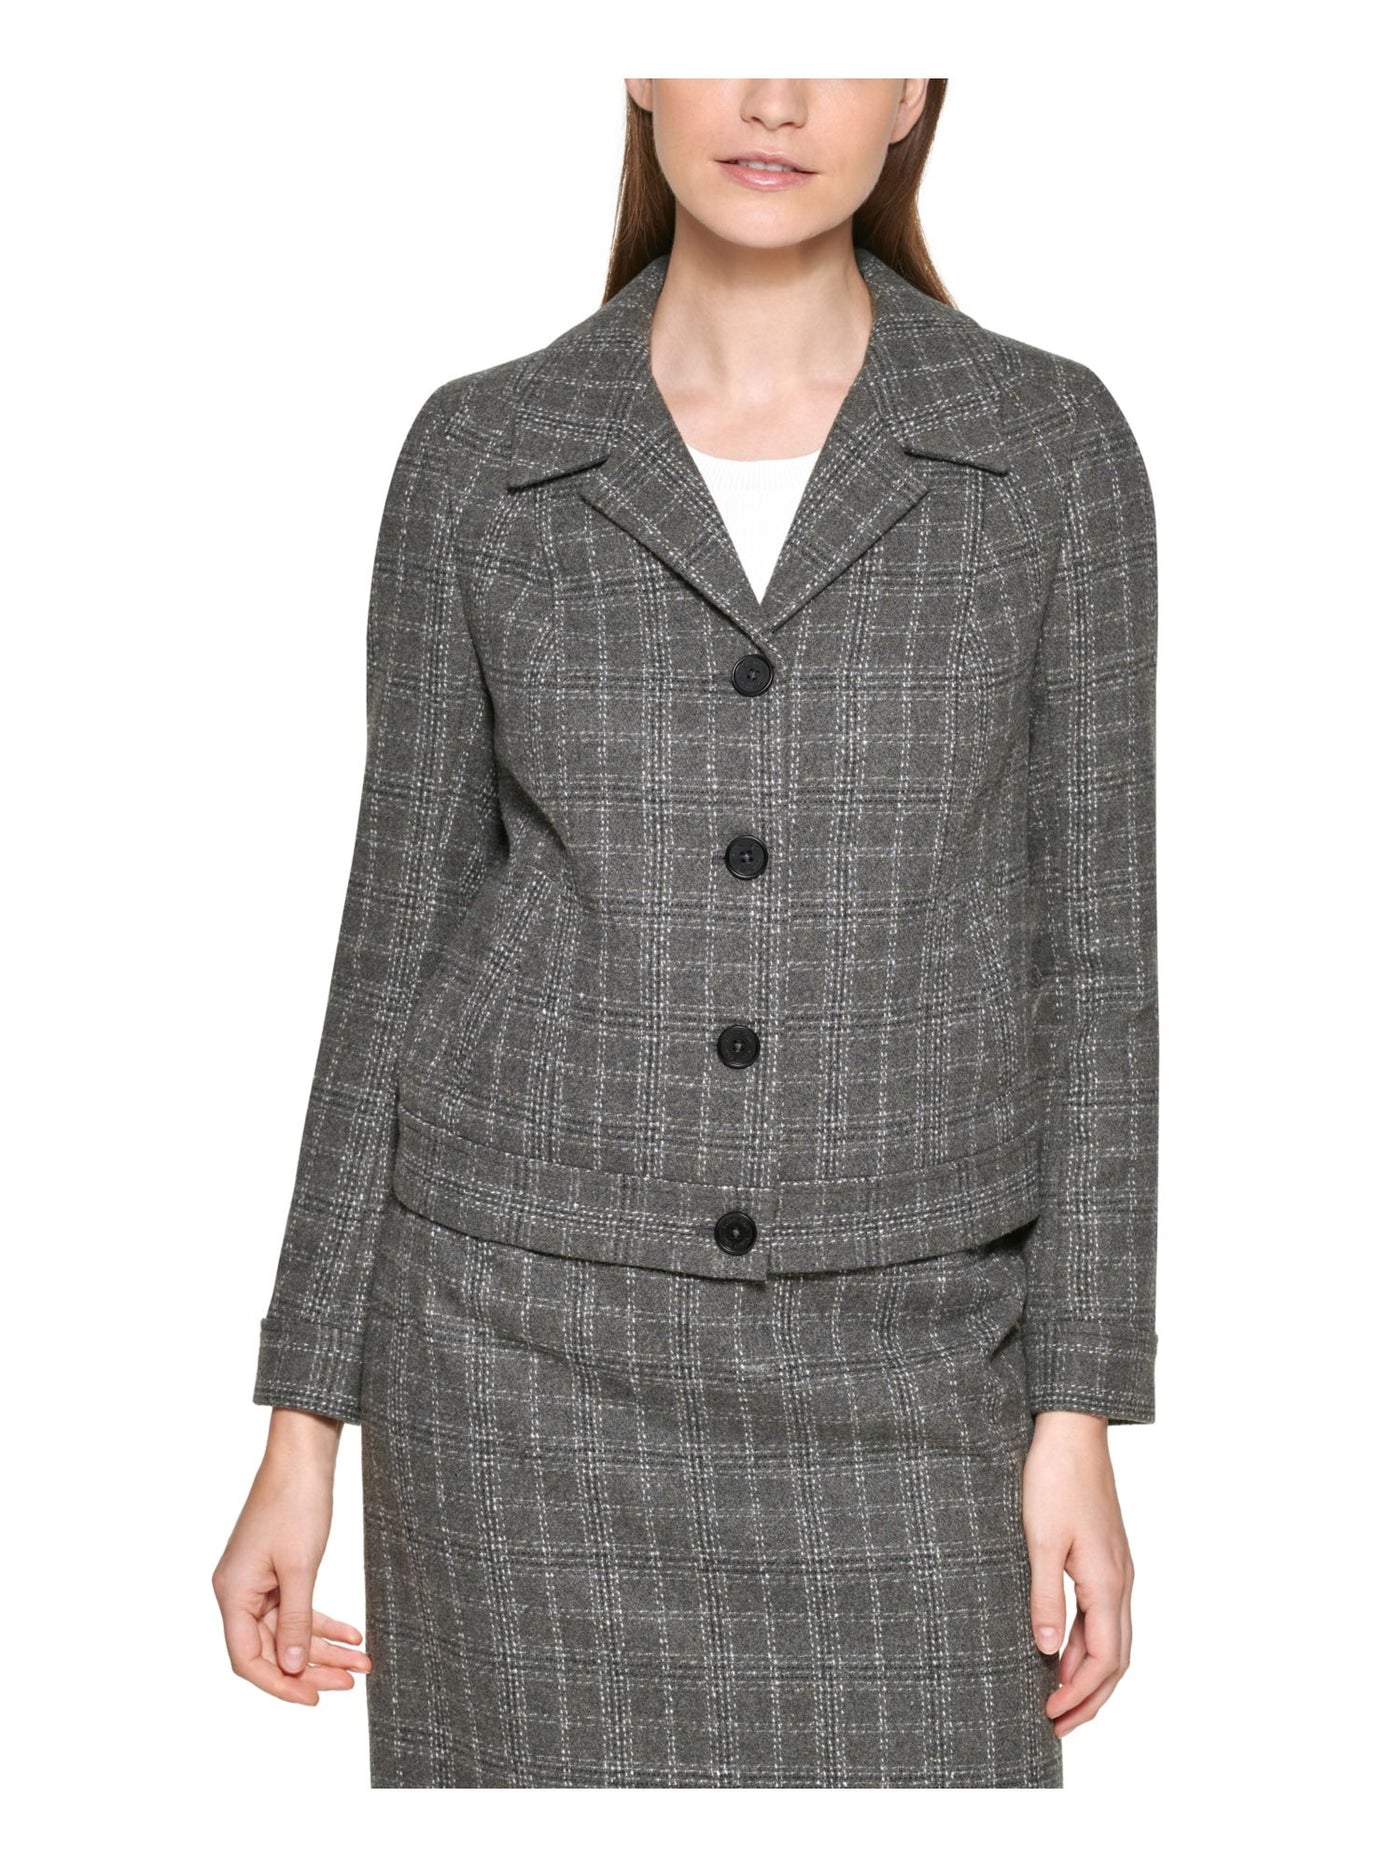 CALVIN KLEIN Womens Gray Pocketed Textured Fitted Plaid Wear To Work Blazer Jacket Petites 2P